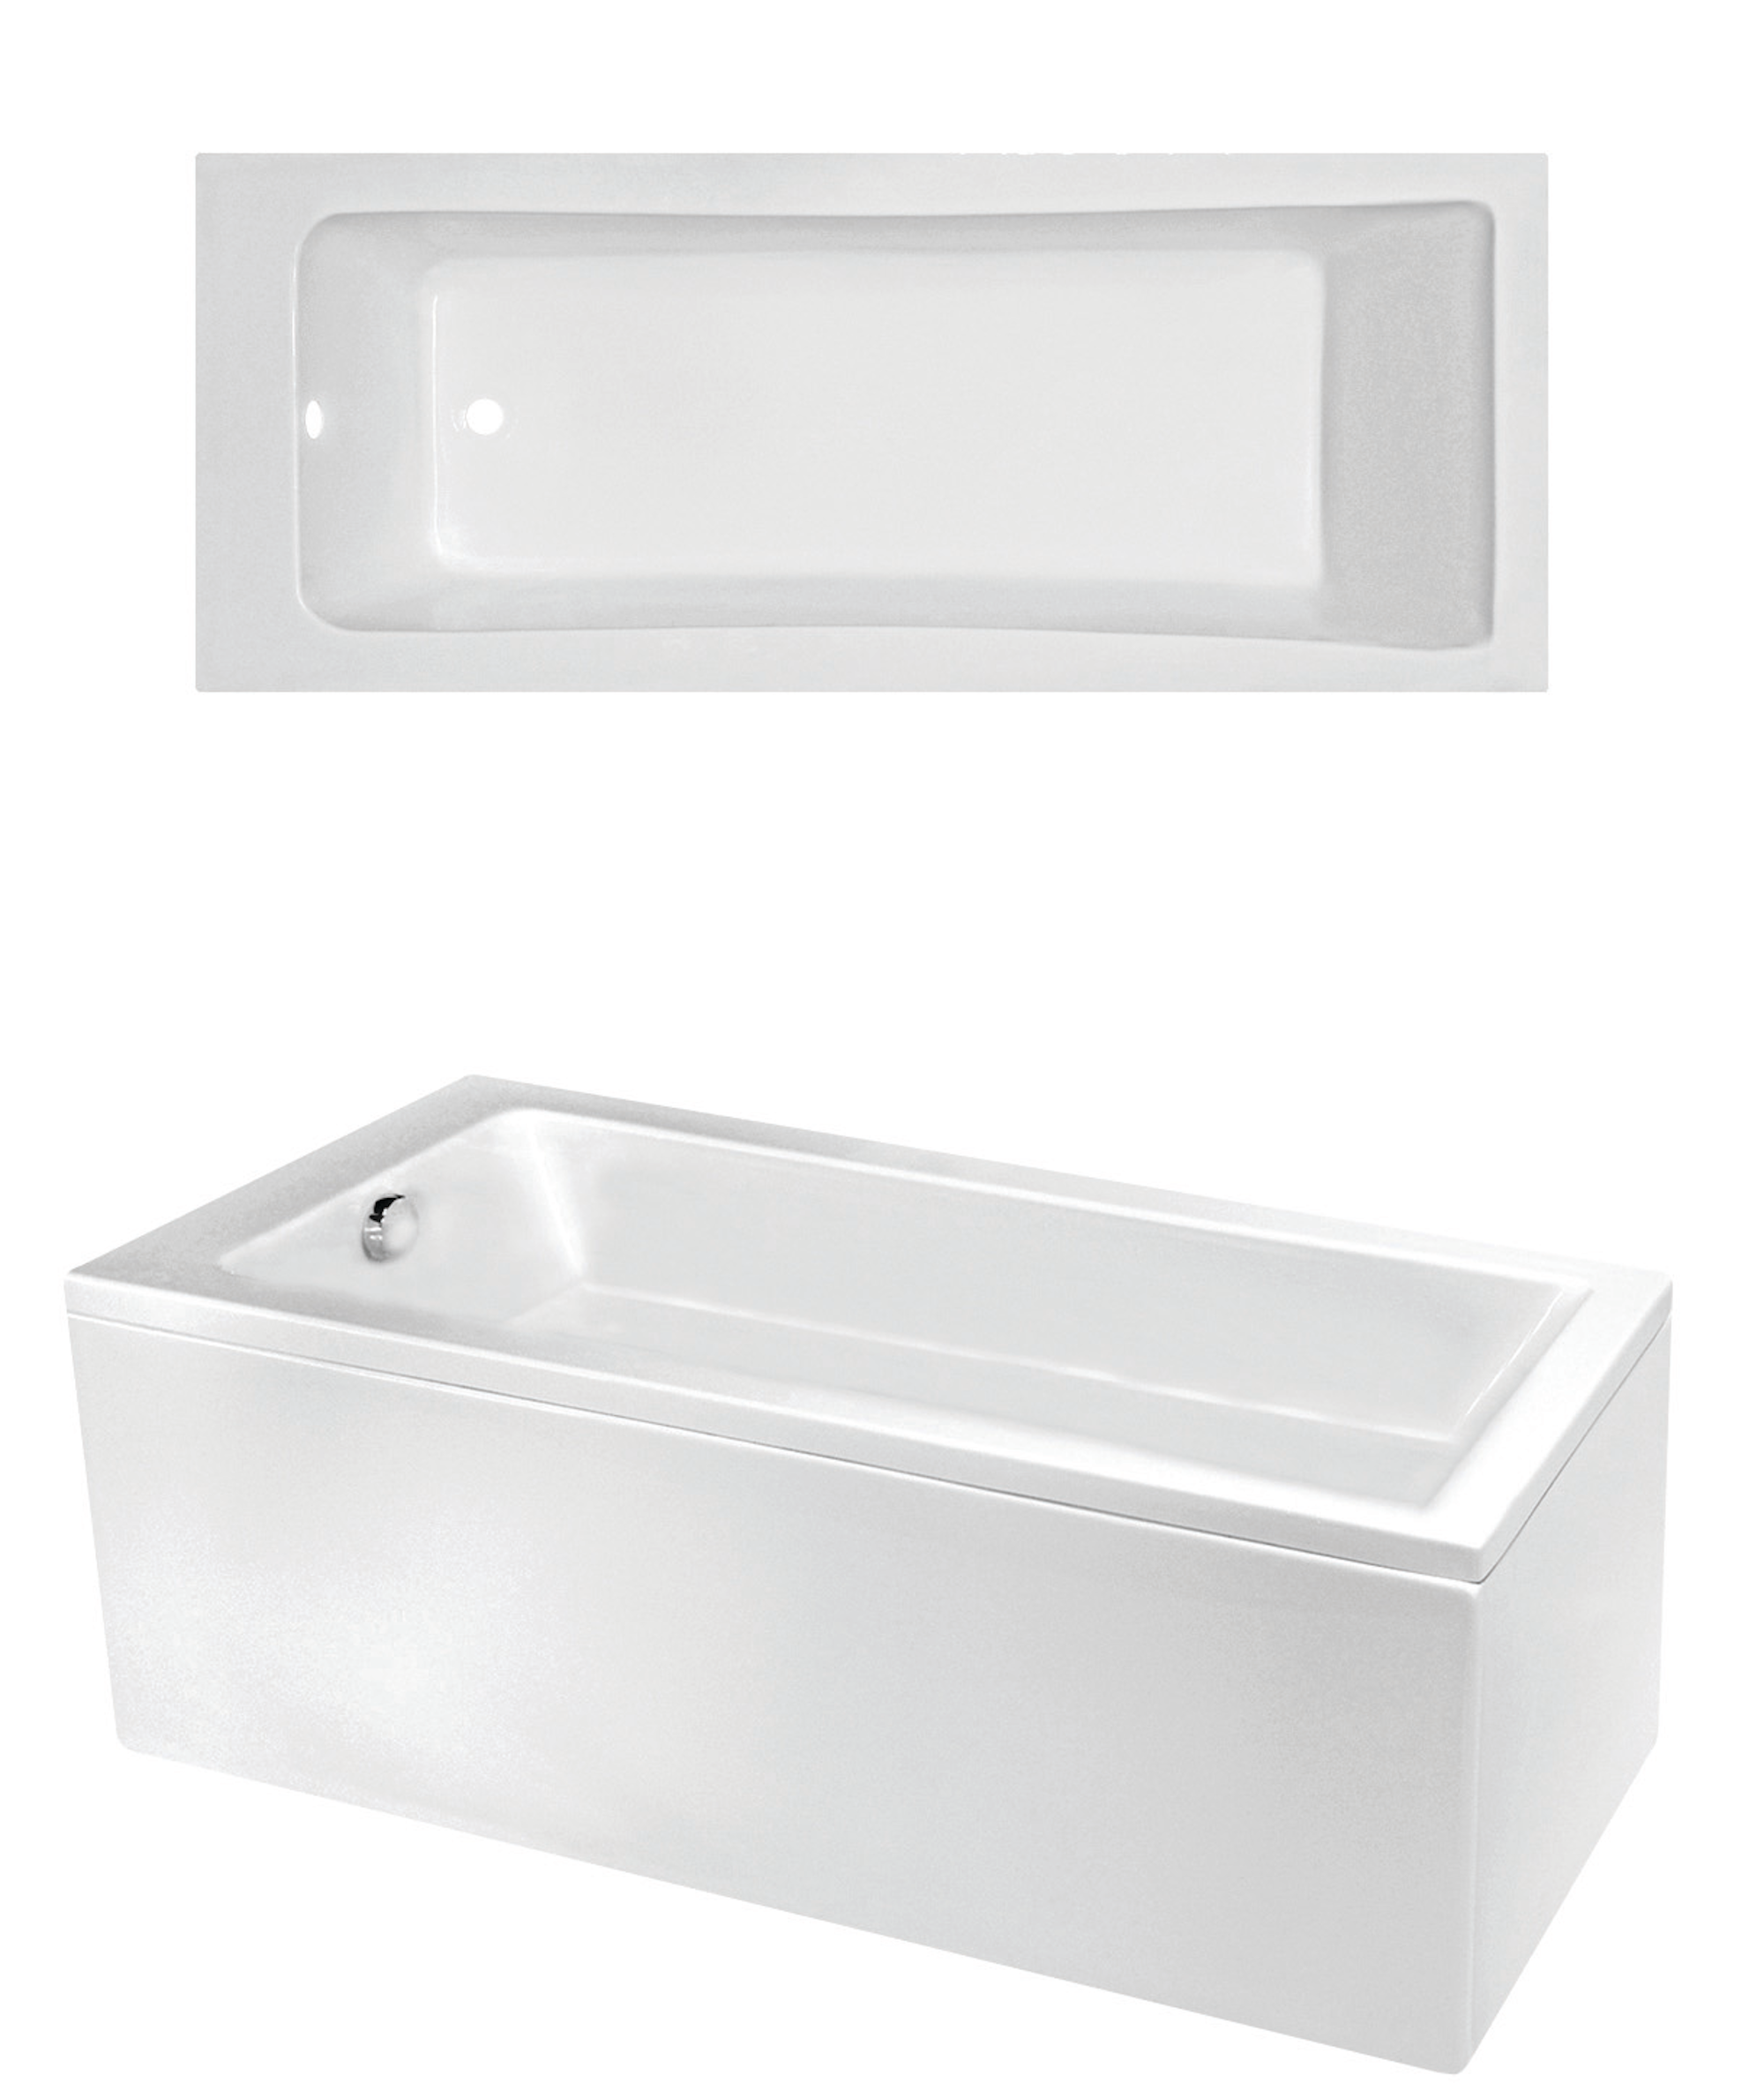 WOSH Reinforced Acrylic 1700mm front bath panel - White